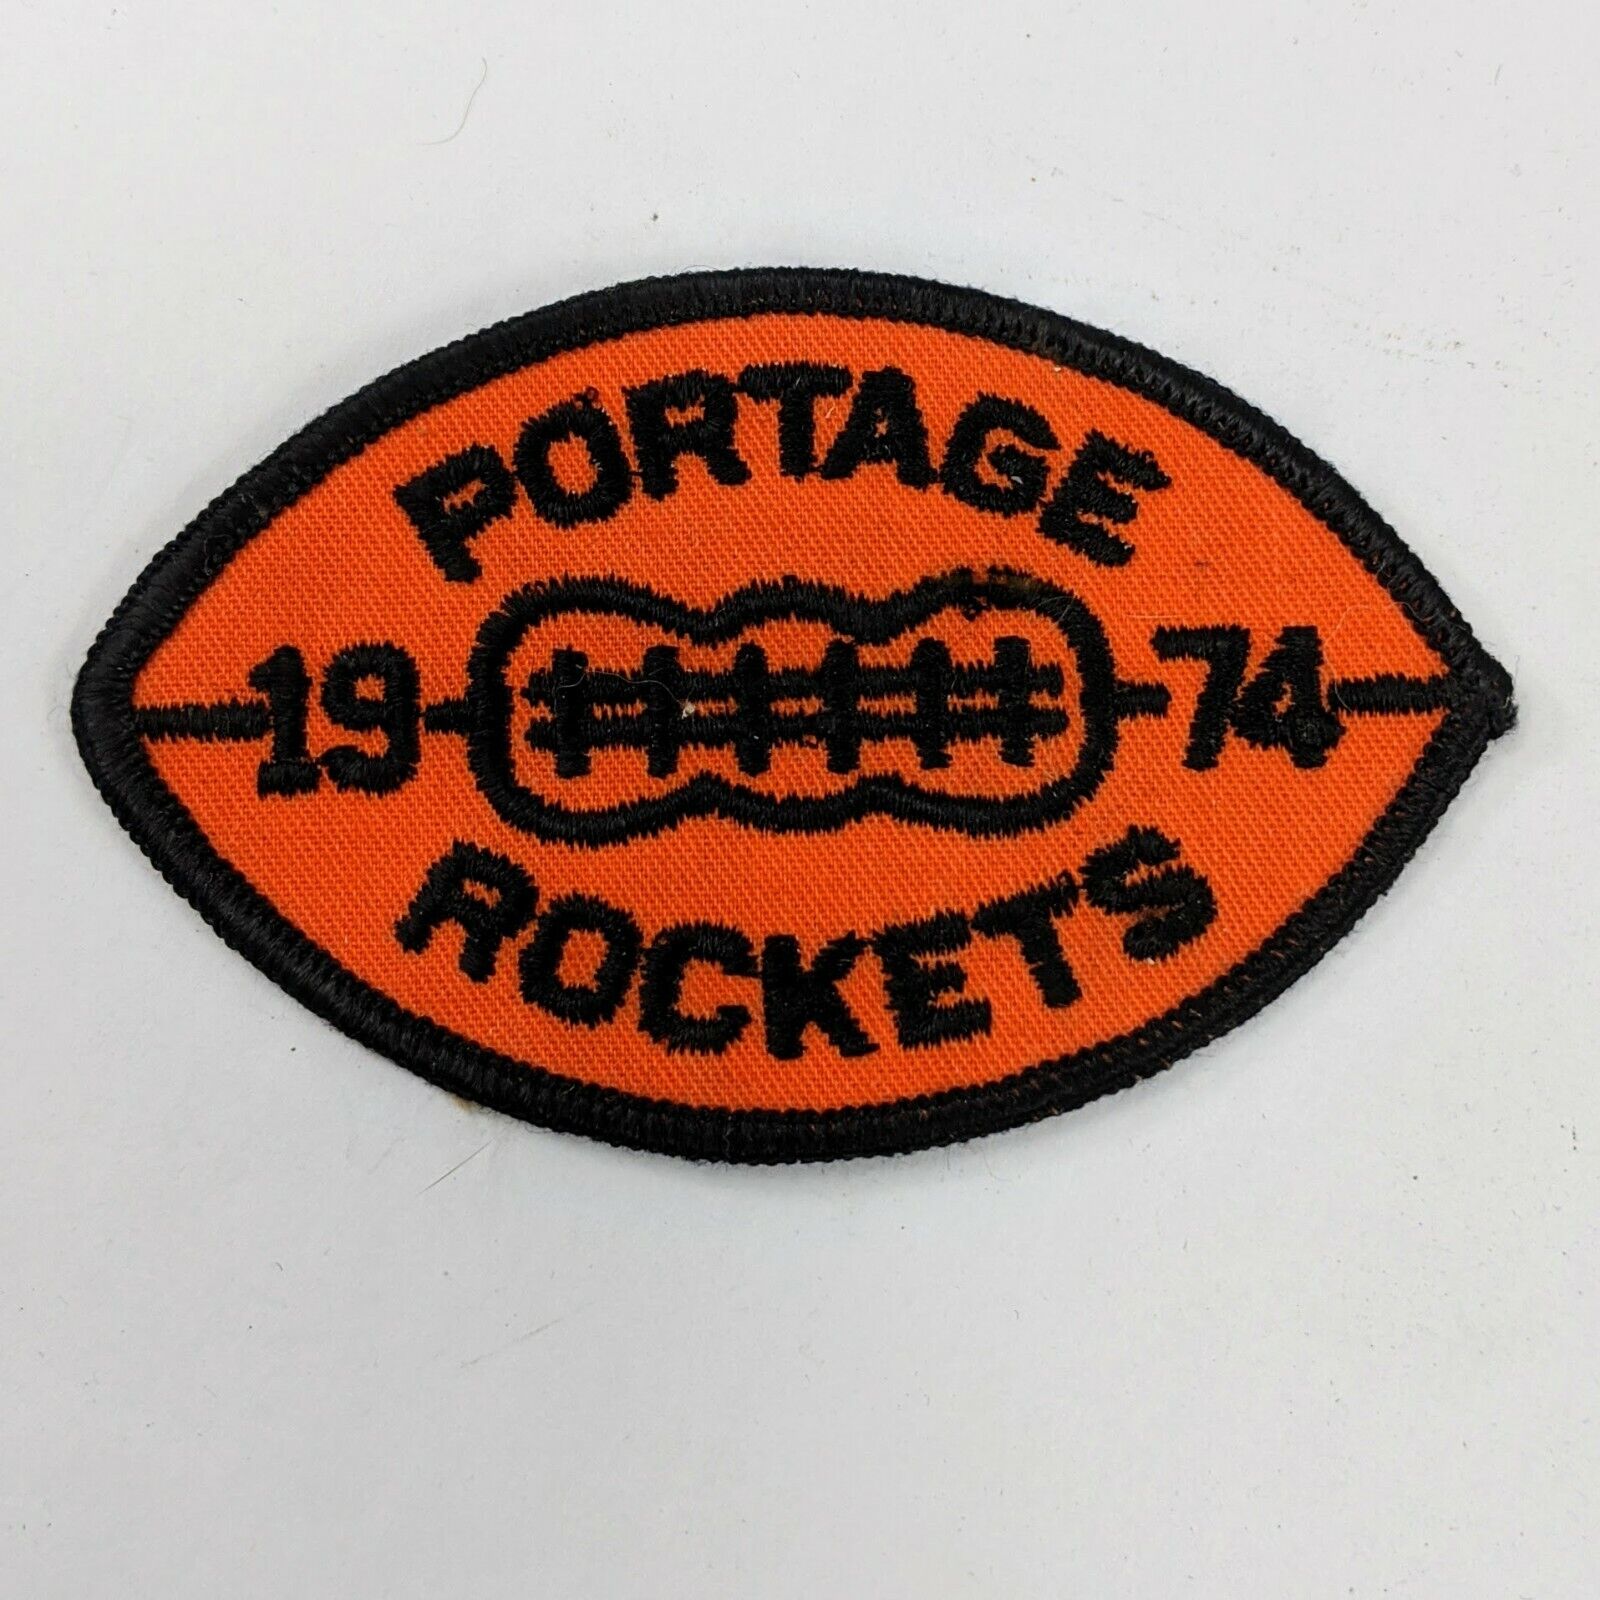 LMH PATCH Badge 1974 PORTAGE ROCKETS  Youth Football League Team Rocket